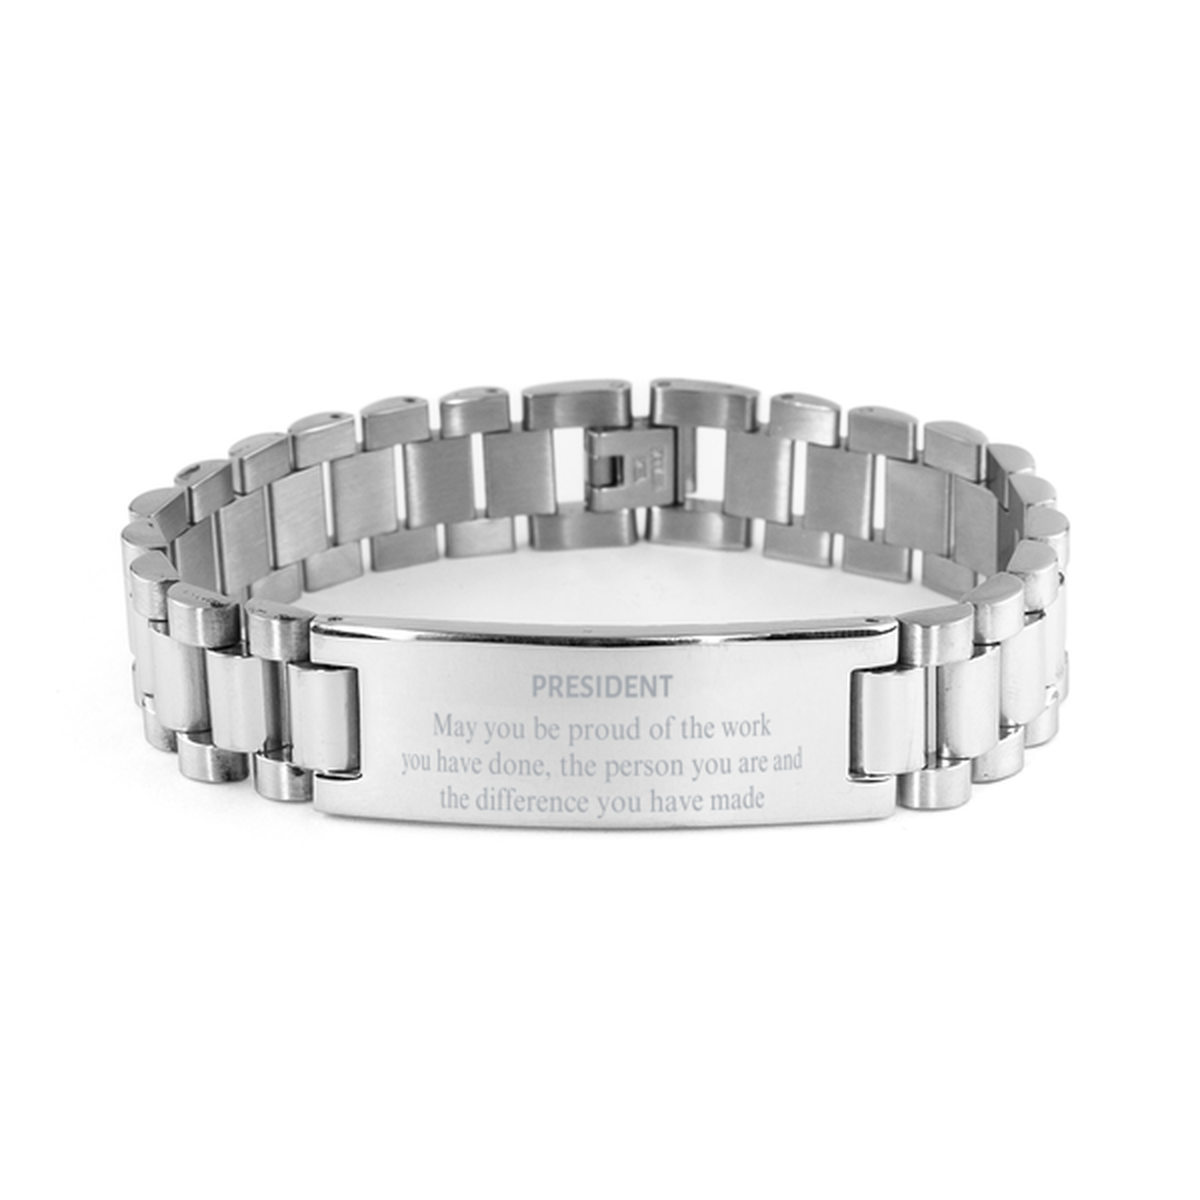 President May you be proud of the work you have done, Retirement President Ladder Stainless Steel Bracelet for Colleague Appreciation Gifts Amazing for President